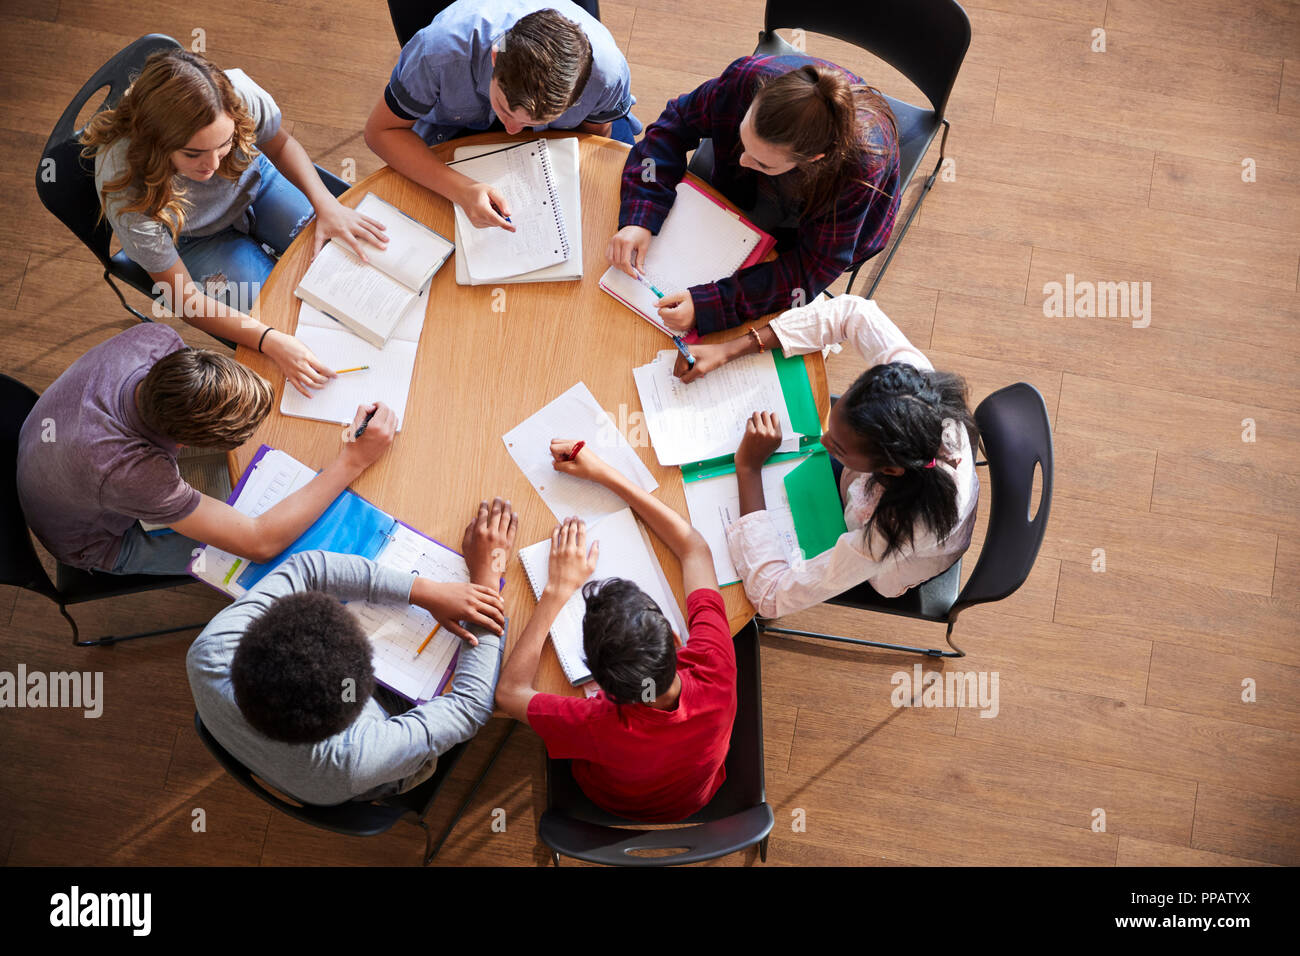 Overhead Shot Of High School Pupils In Group Study Around Tables Stock Photo